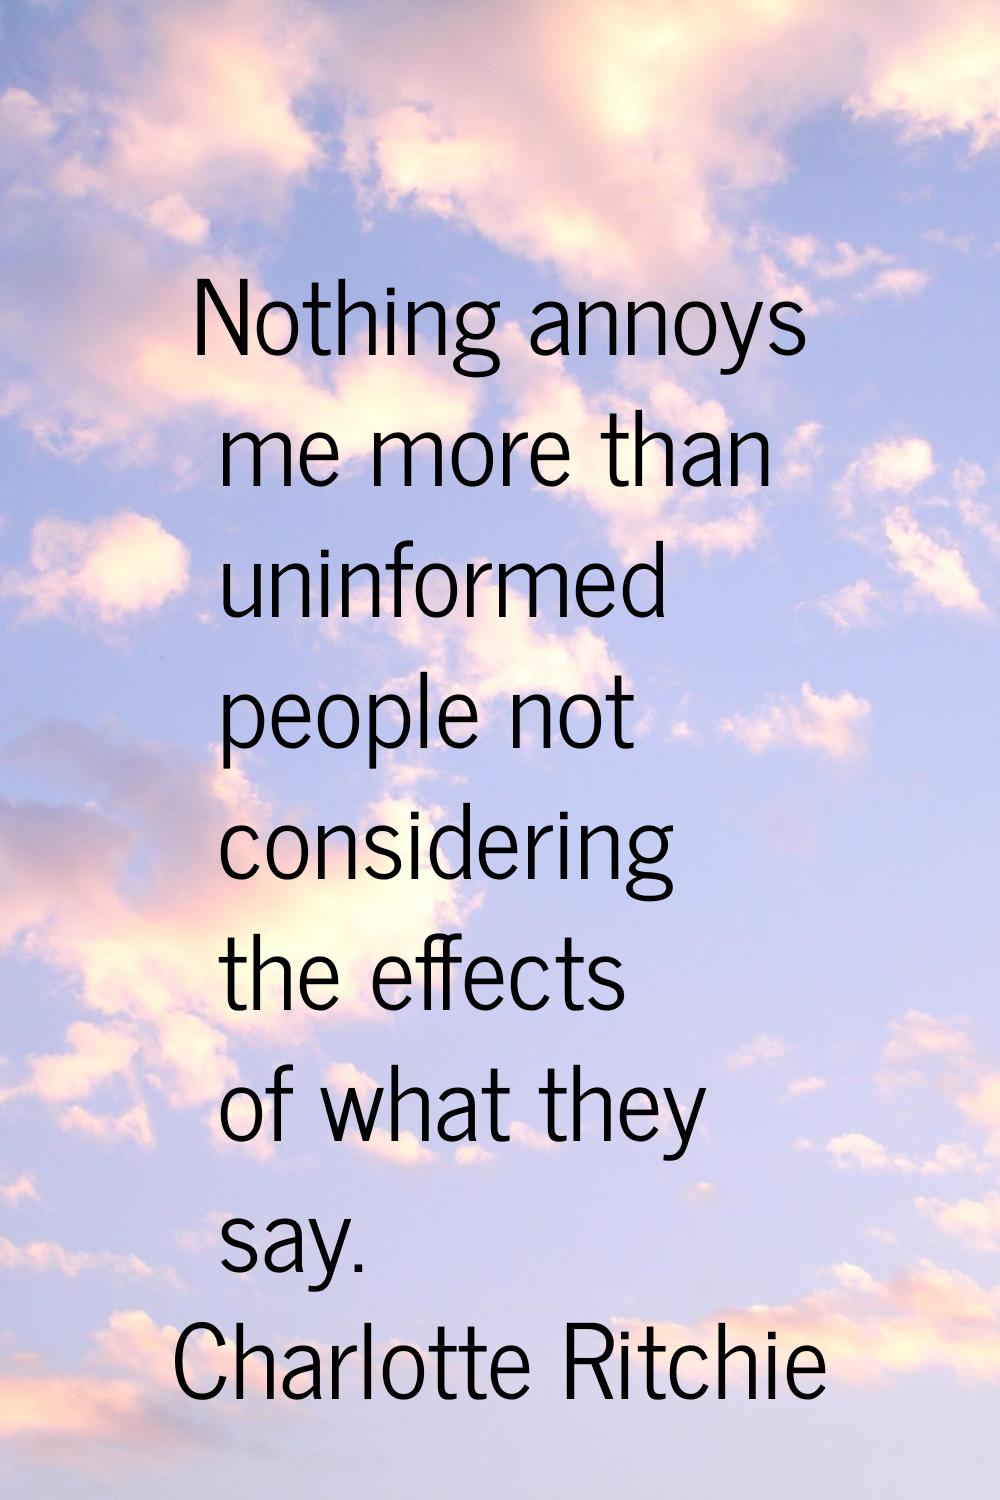 Nothing annoys me more than uninformed people not considering the effects of what they say.